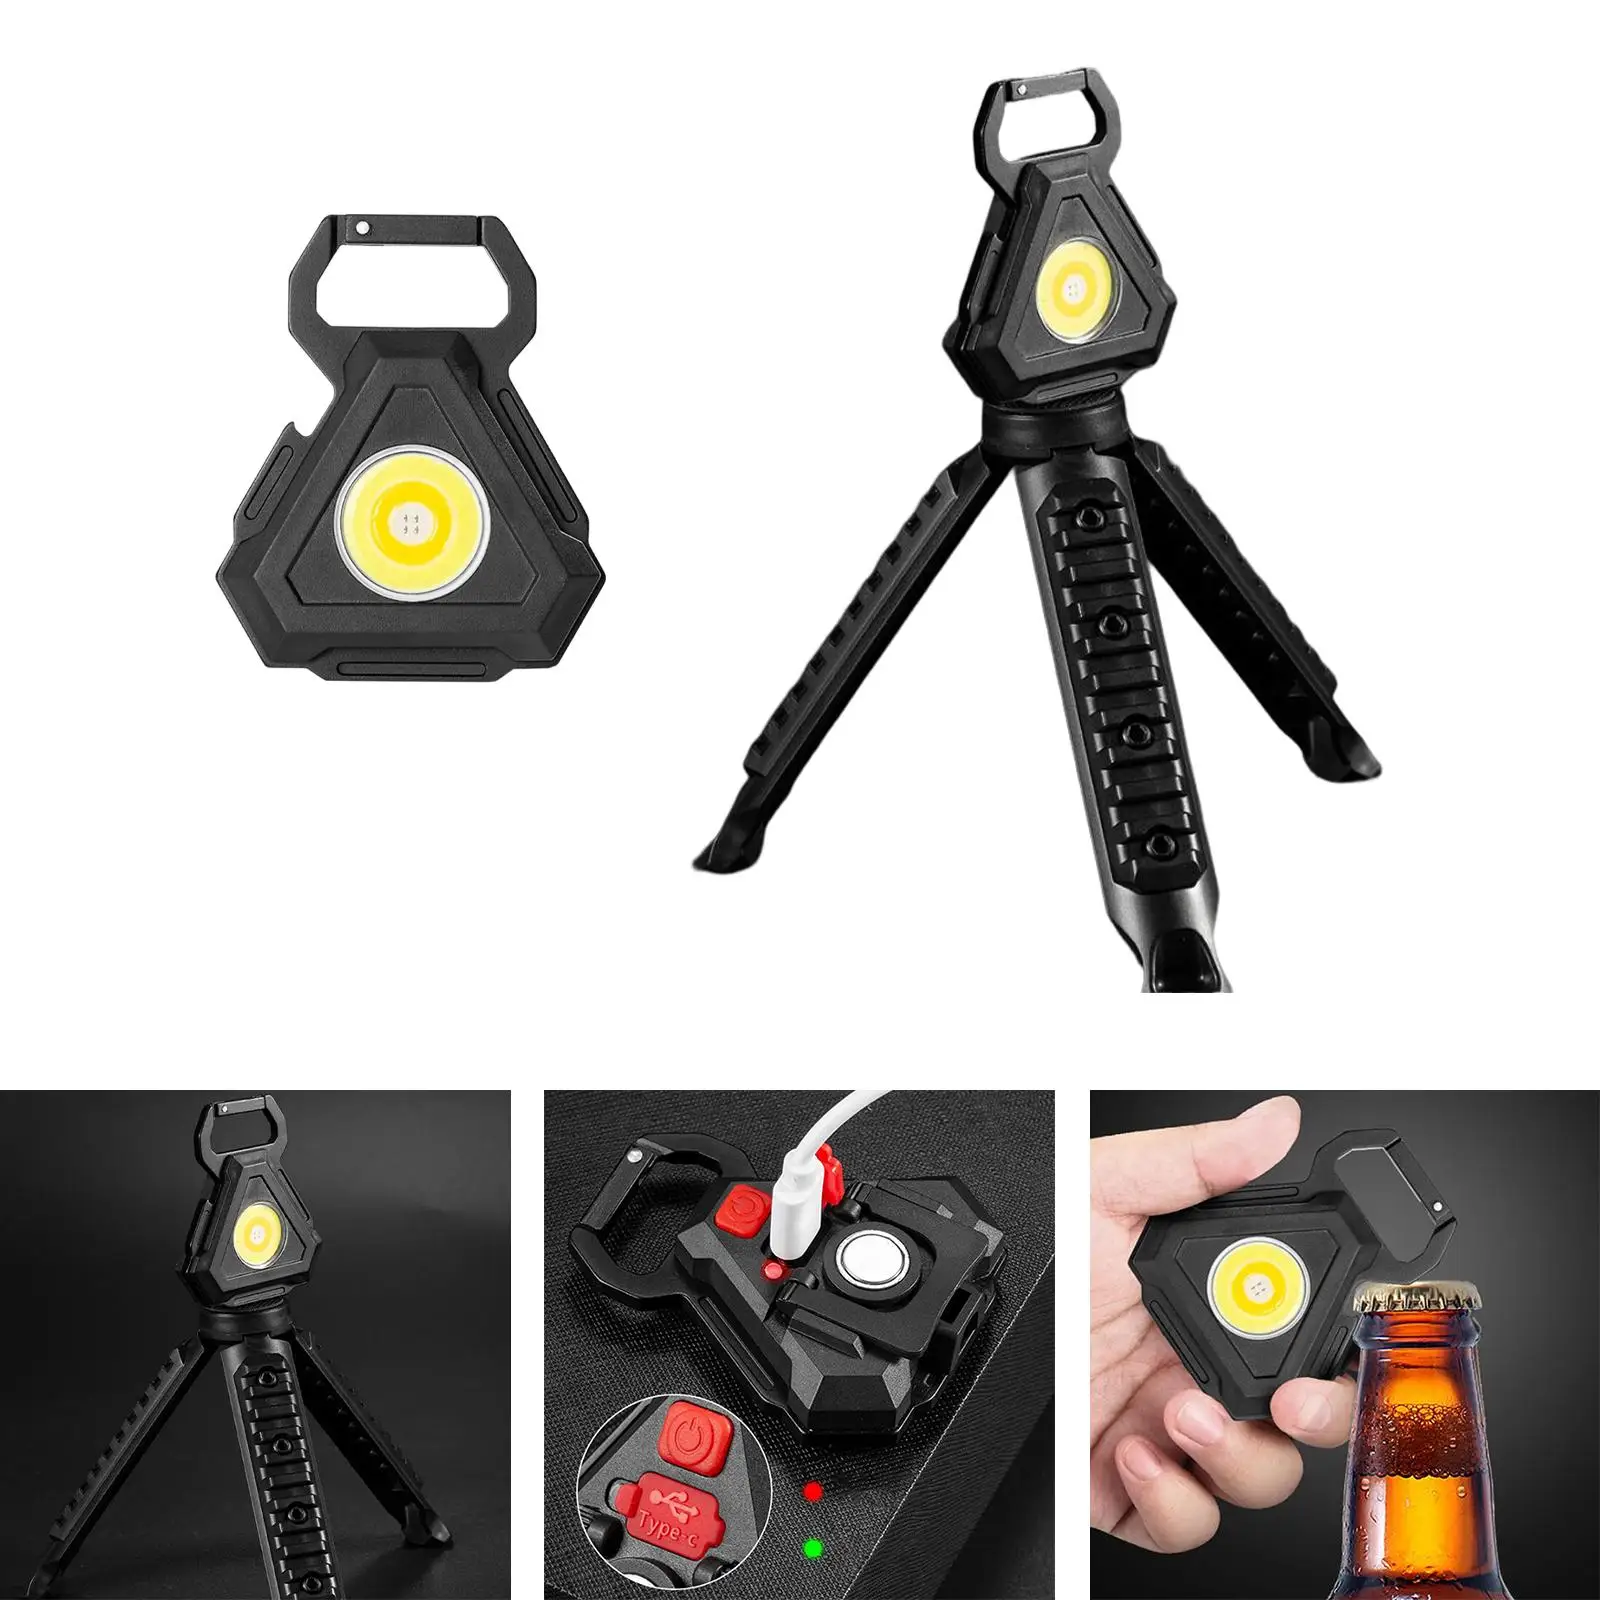 COB Flashlight Keychain Torch Pocket Light Rechargeable 500 Lumens Waterproof Lamp Work Light for Outdoor Camping Hiking Walking